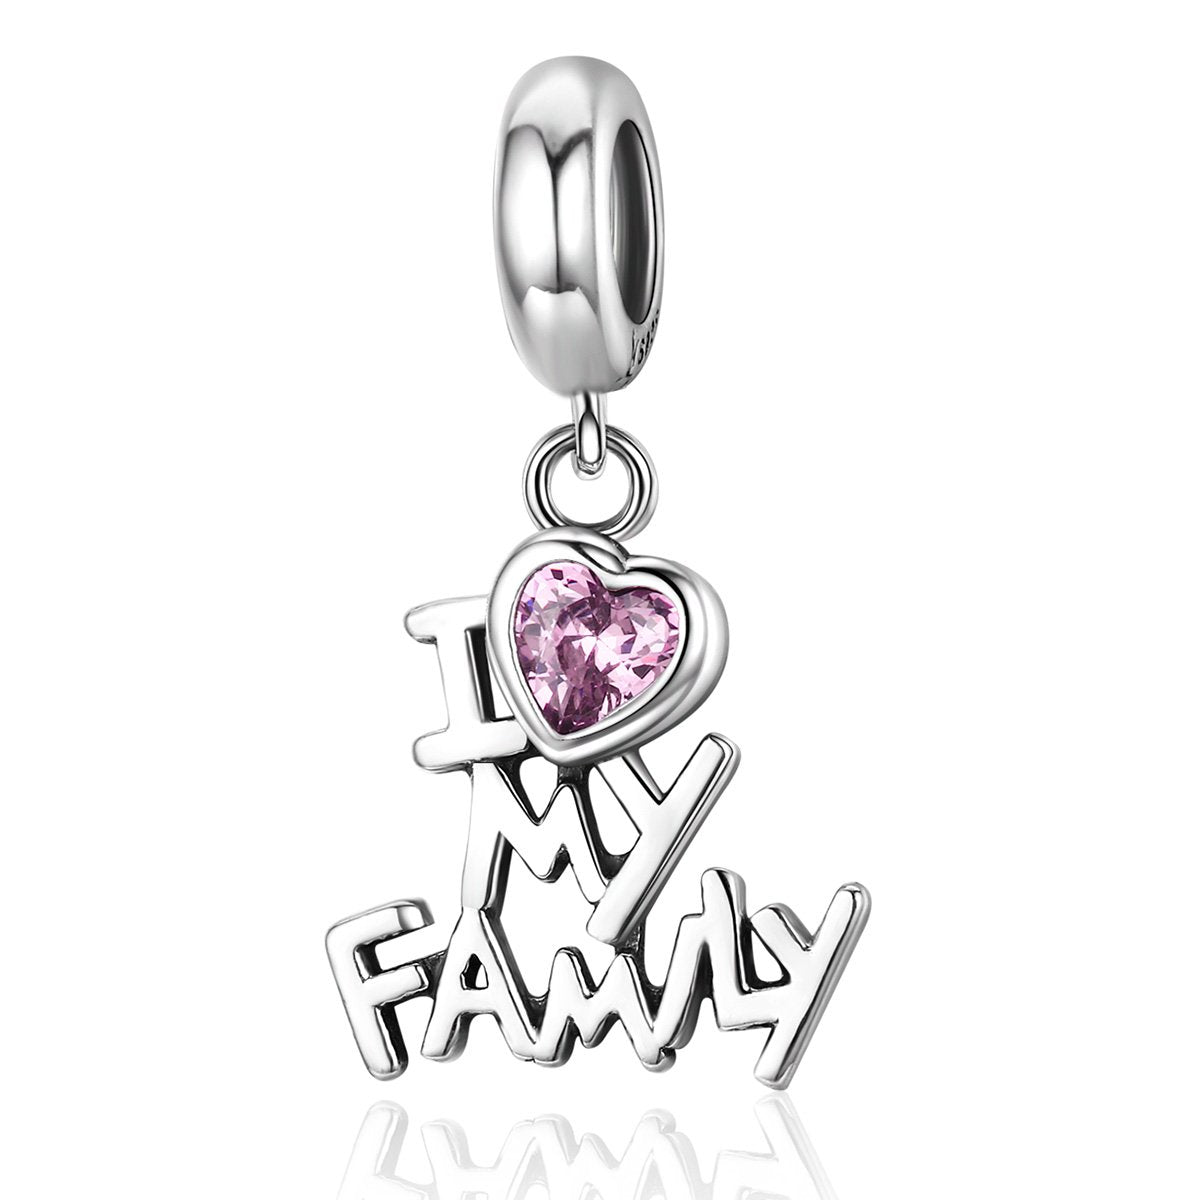 Sterling 925 silver charm the love family puls bead pendant fits Pandora charm and European charm bracelet Xaxe.com